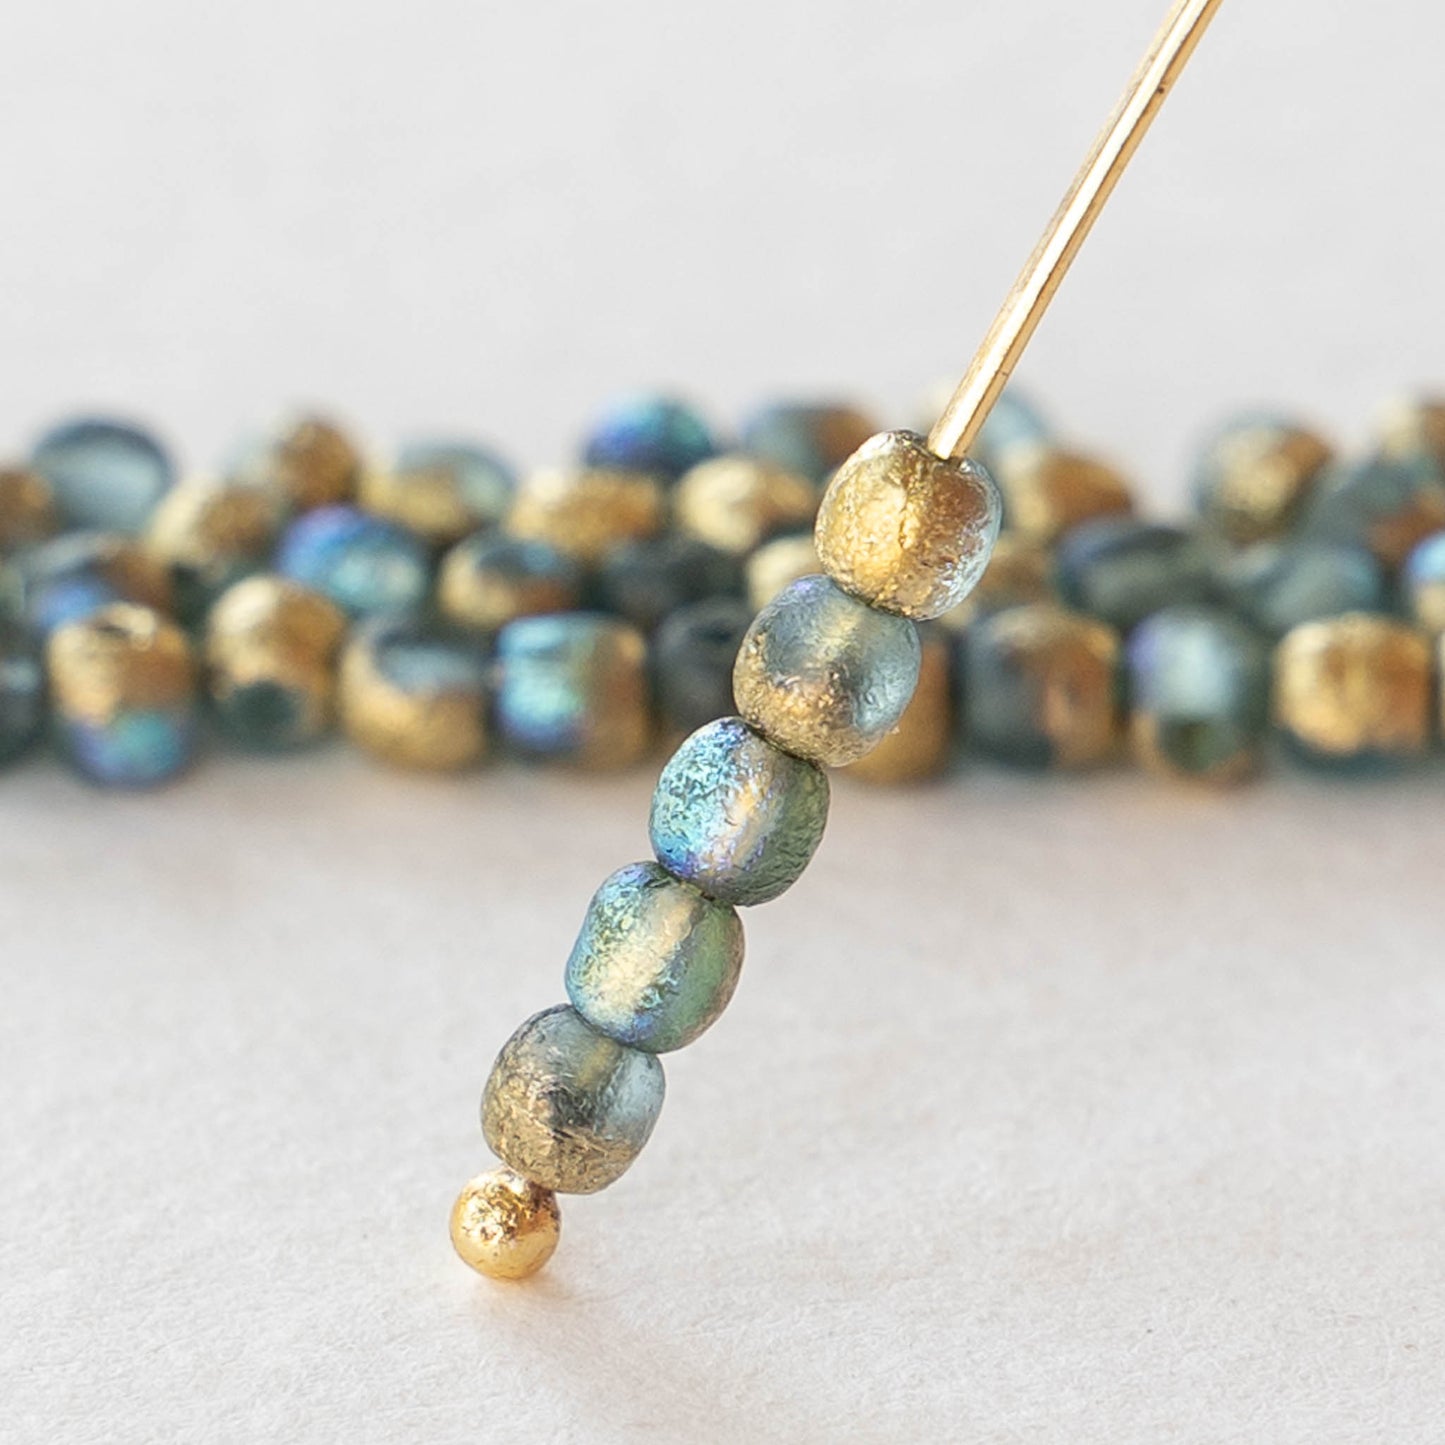 3mm Round Glass Beads - Etched Aqua Blue with AB and Gold - 50 Beads